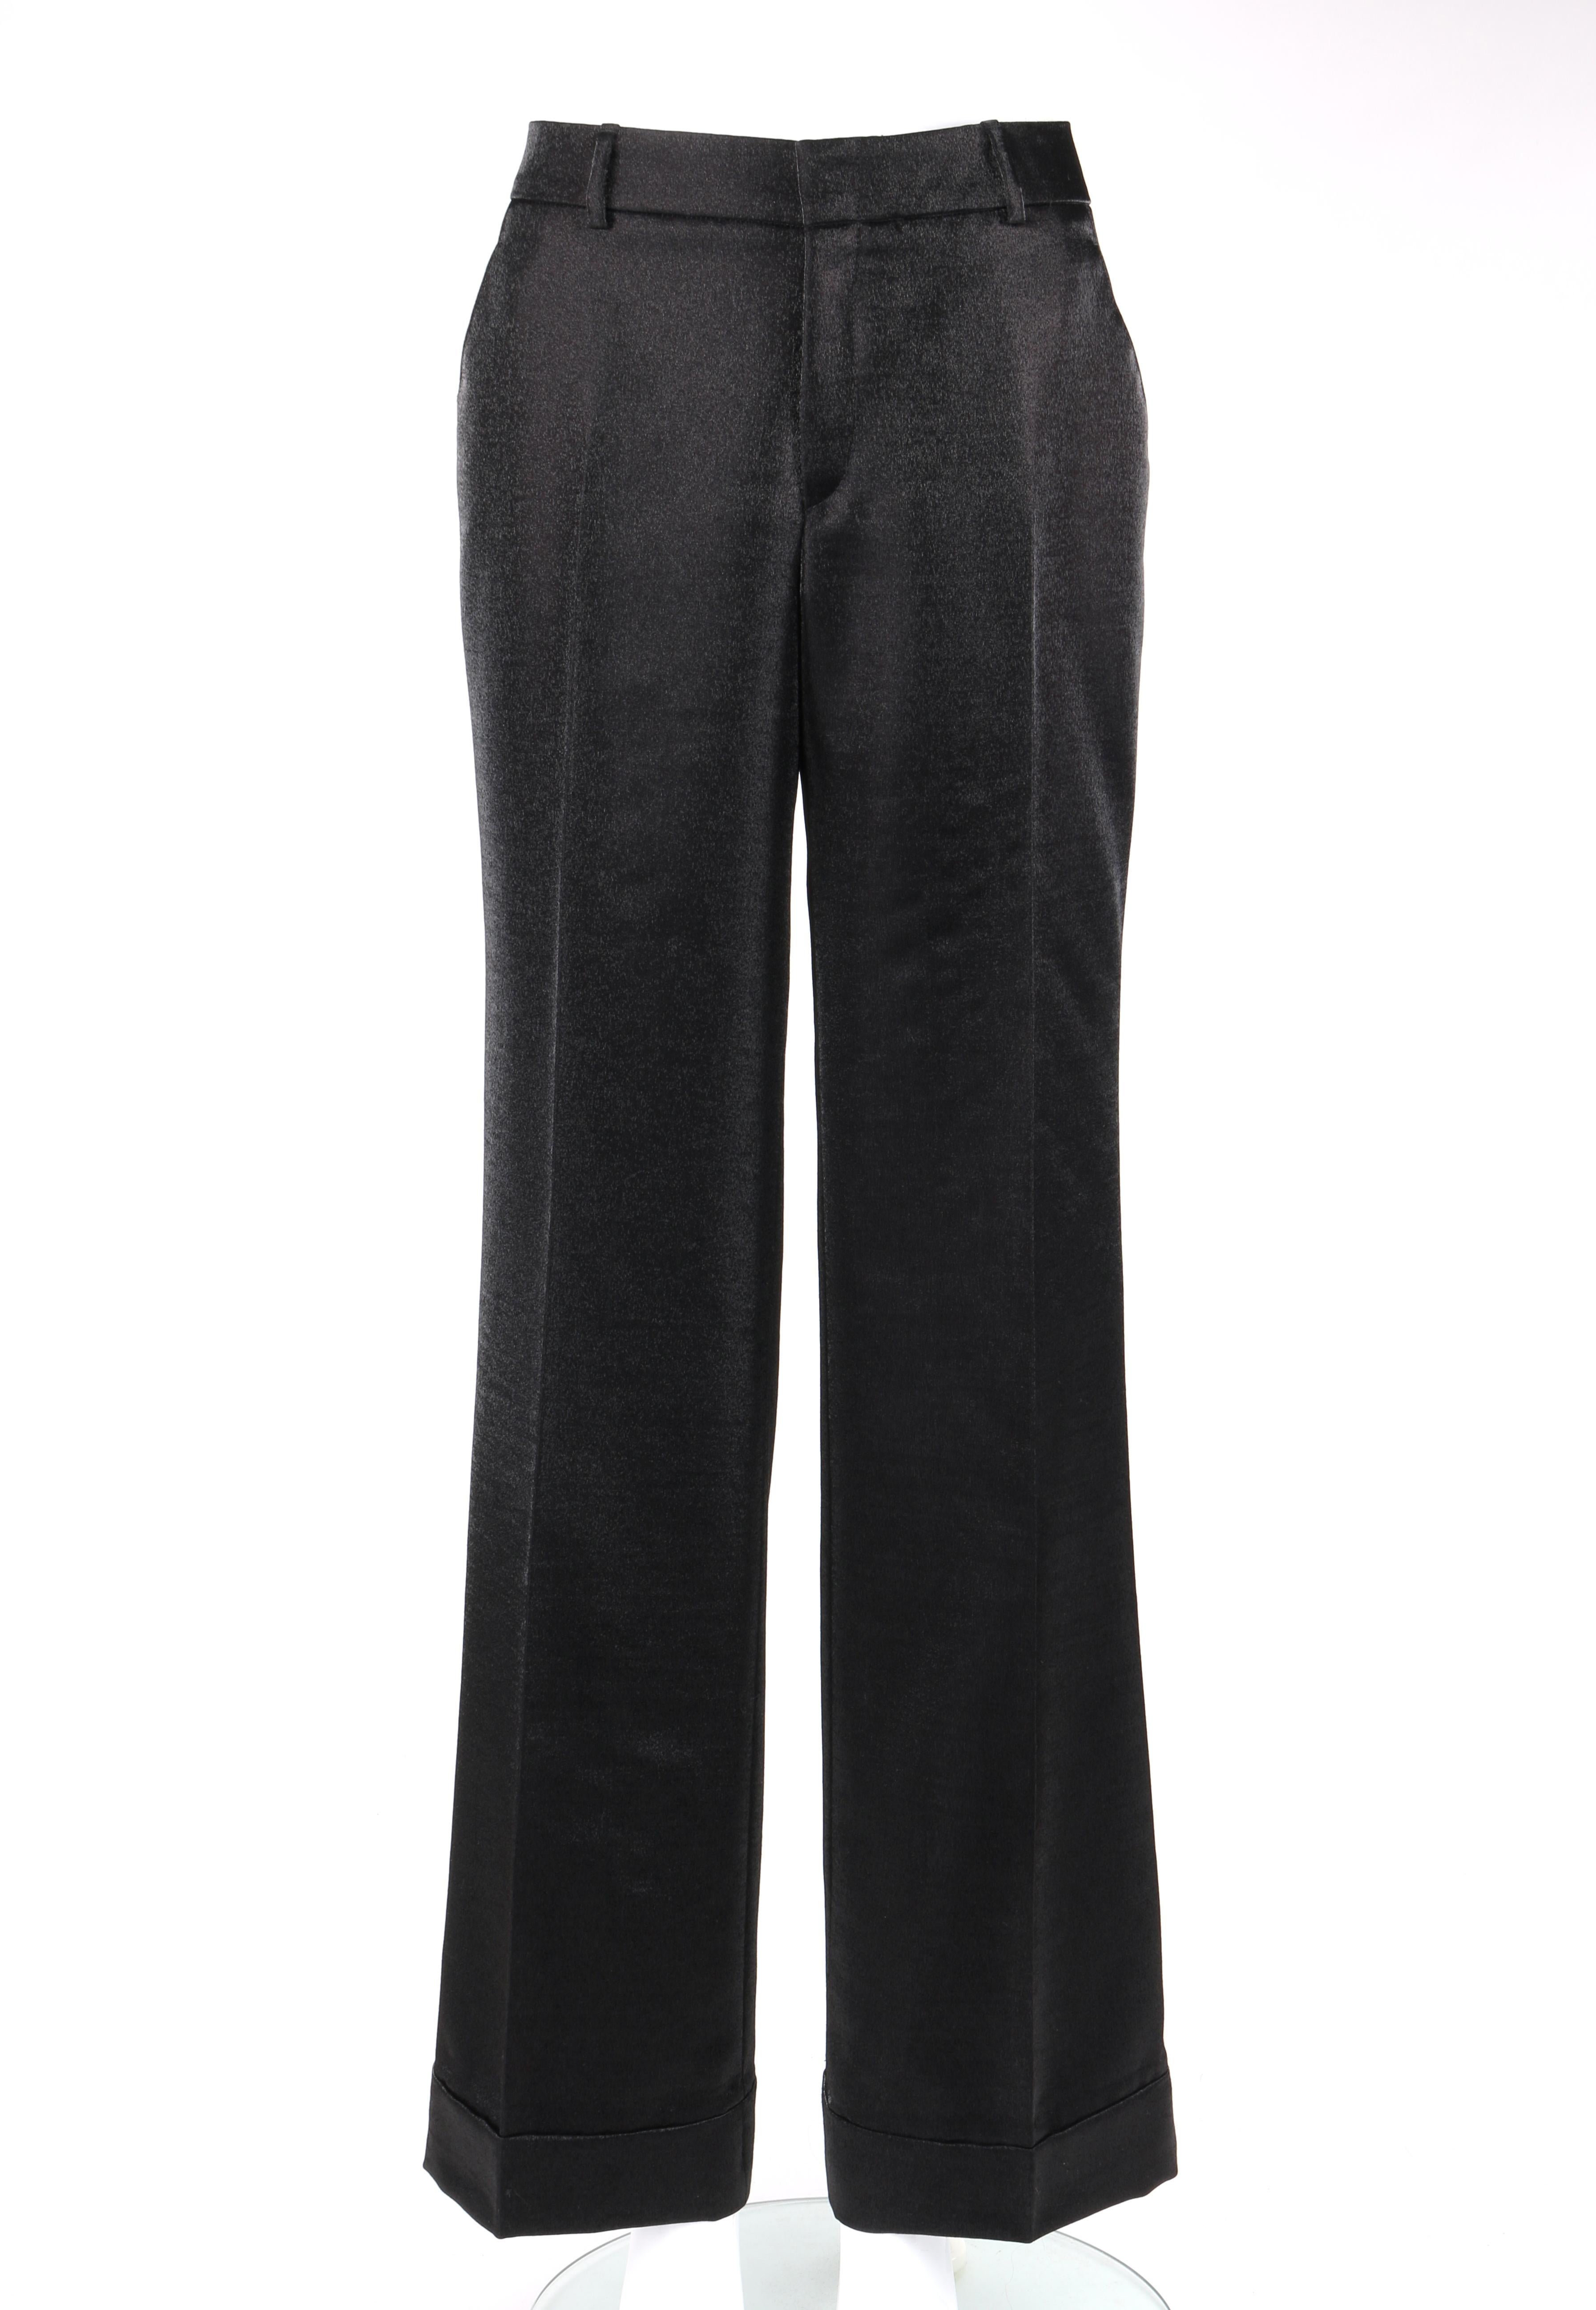 GUCCI A/W 2006 2pc Black Metallic Satin Blazer & Wide Leg Trouser Pant Suit Set In Good Condition In Thiensville, WI